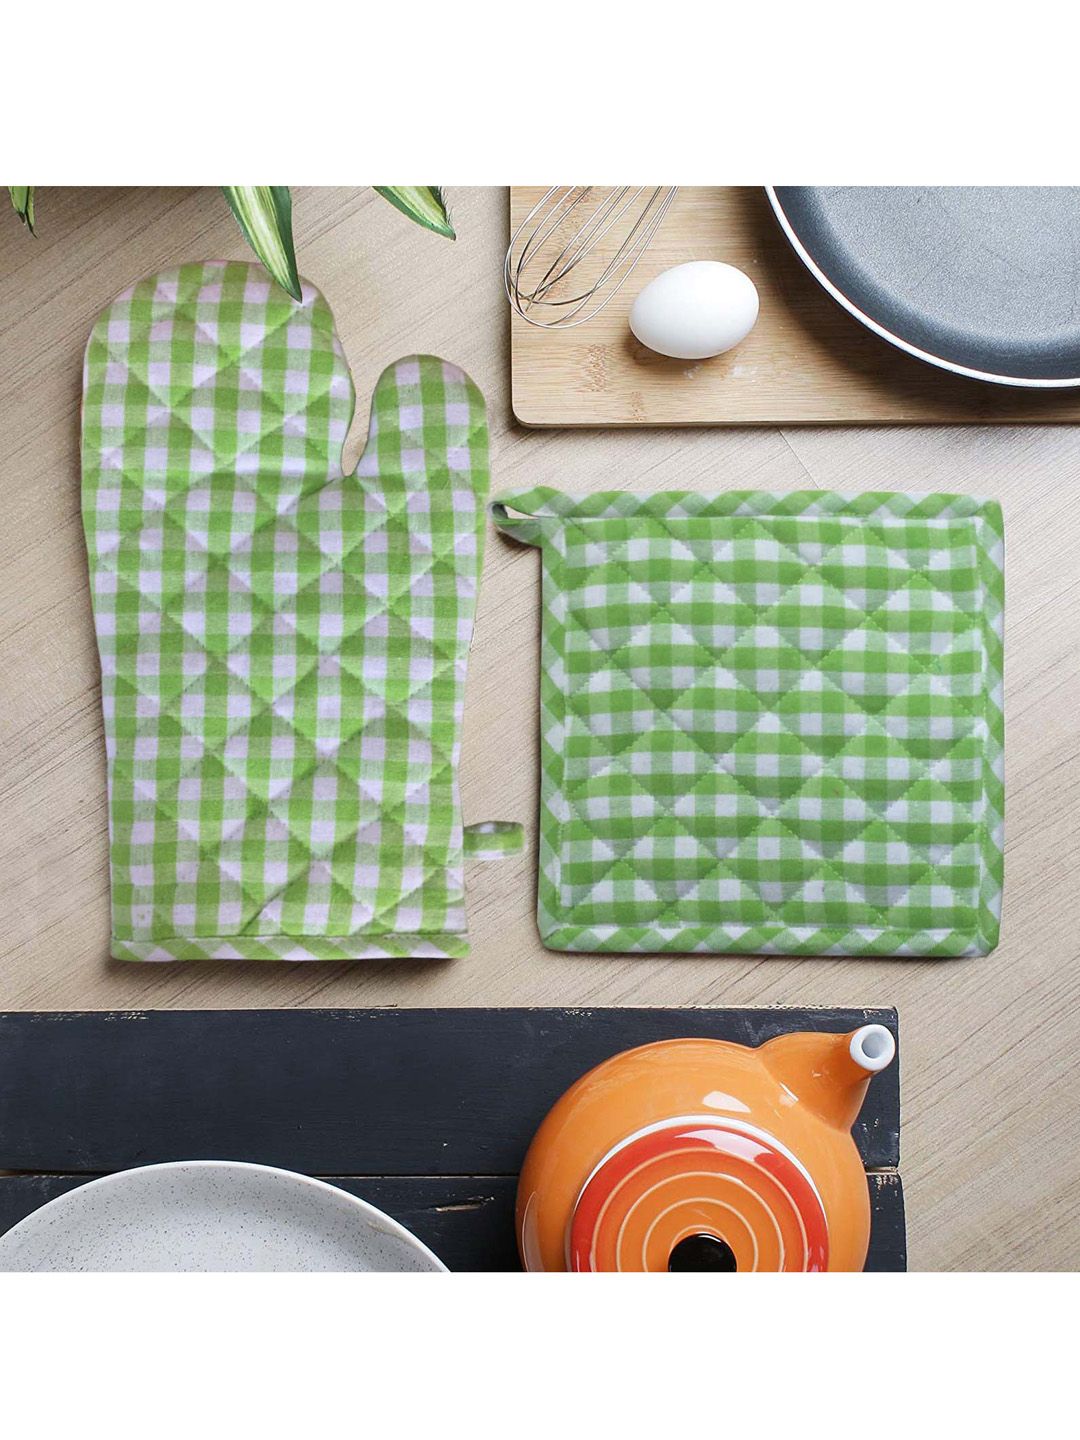 Lushomes Green & White Checked 1 Pot Holder & 1 Oven Mitten Set Price in India